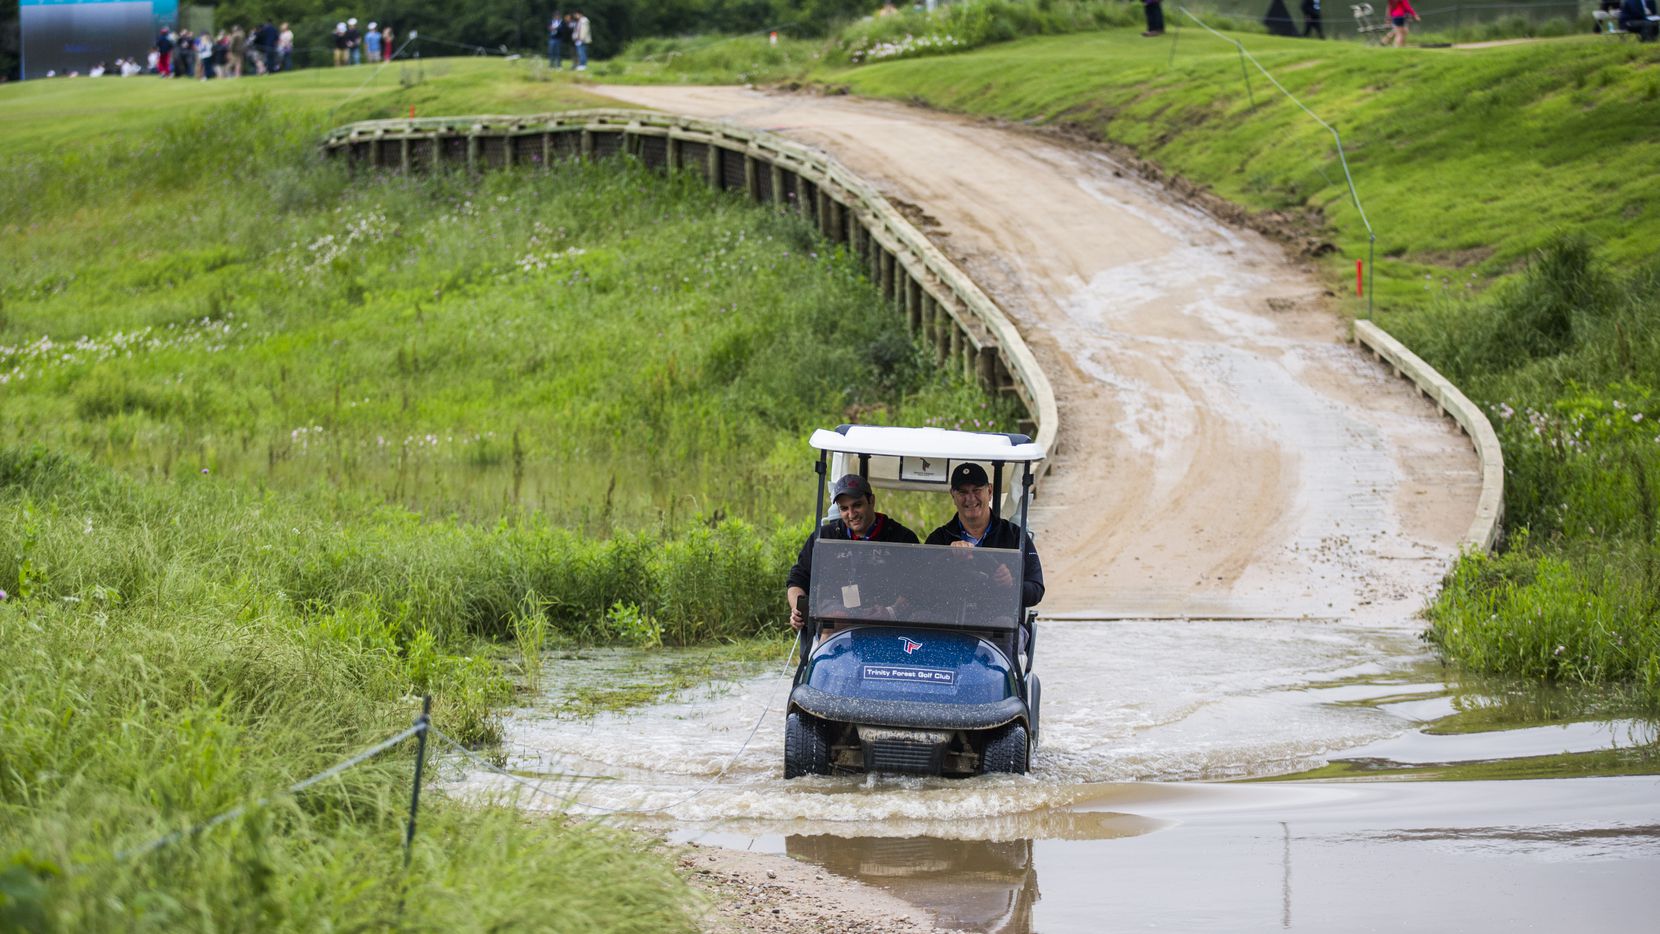 Mayor Mike Rawlings drives a golf cart through a large puddle near hole 12 during round 3 of...